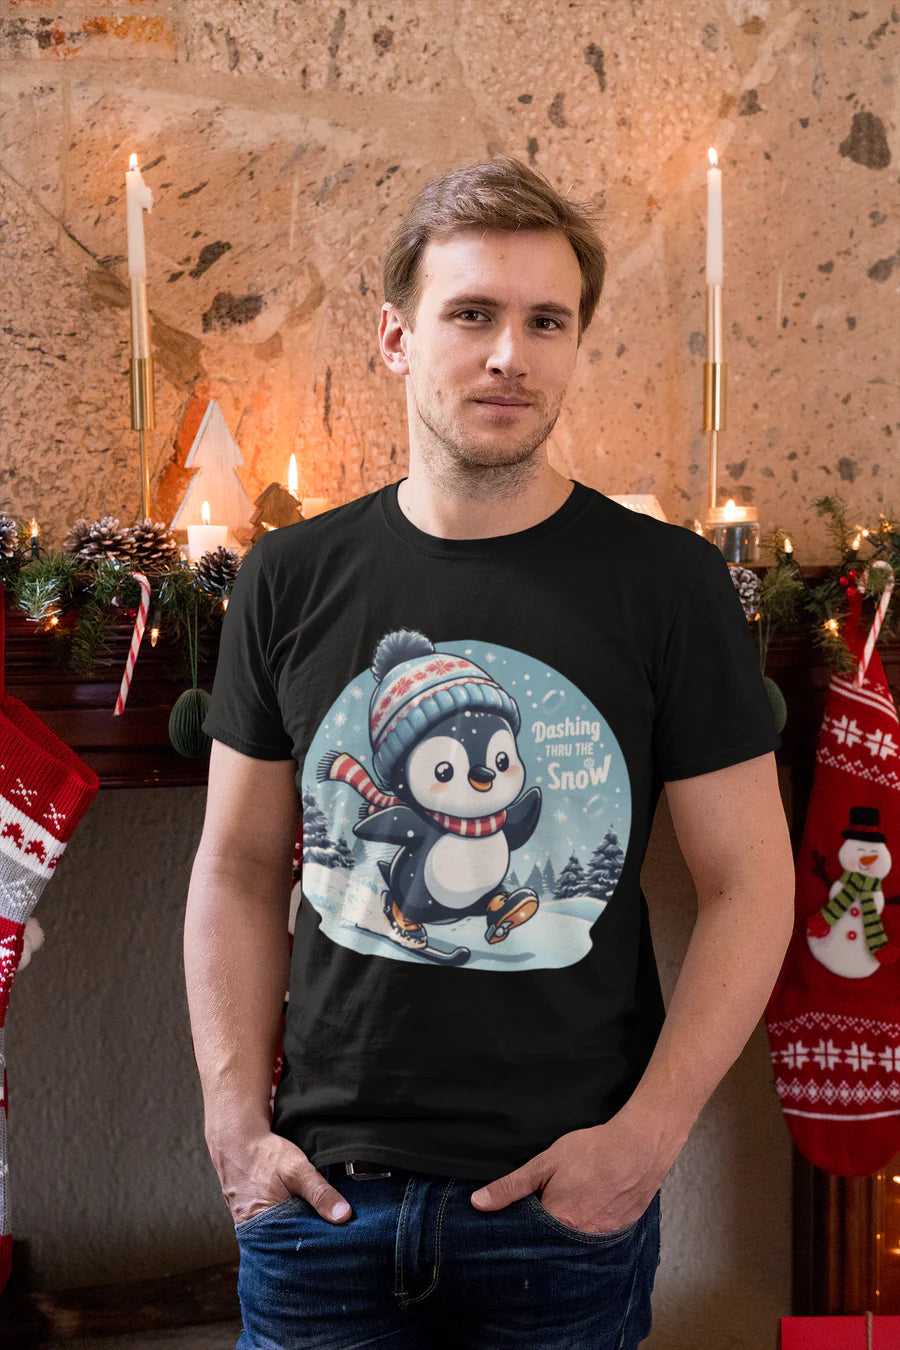 Man standing in a room, wearing a black t-shirt with a design at the front of a penguin skiing and the text 'dashing thru the snow'